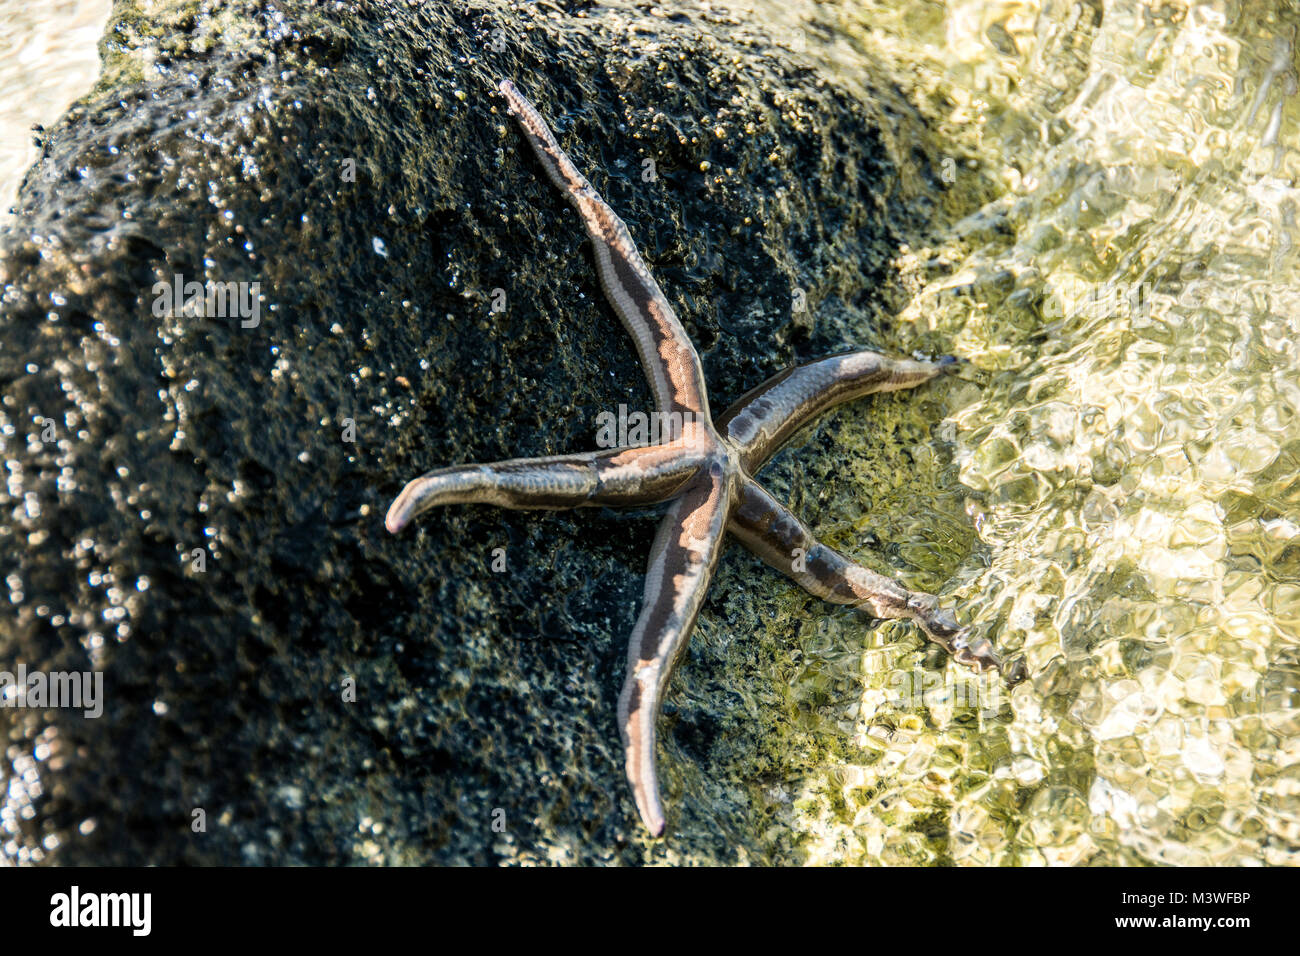 A starfish on a rock on the island of Coronado, part of the Bay or Loreto National Park system. Stock Photo